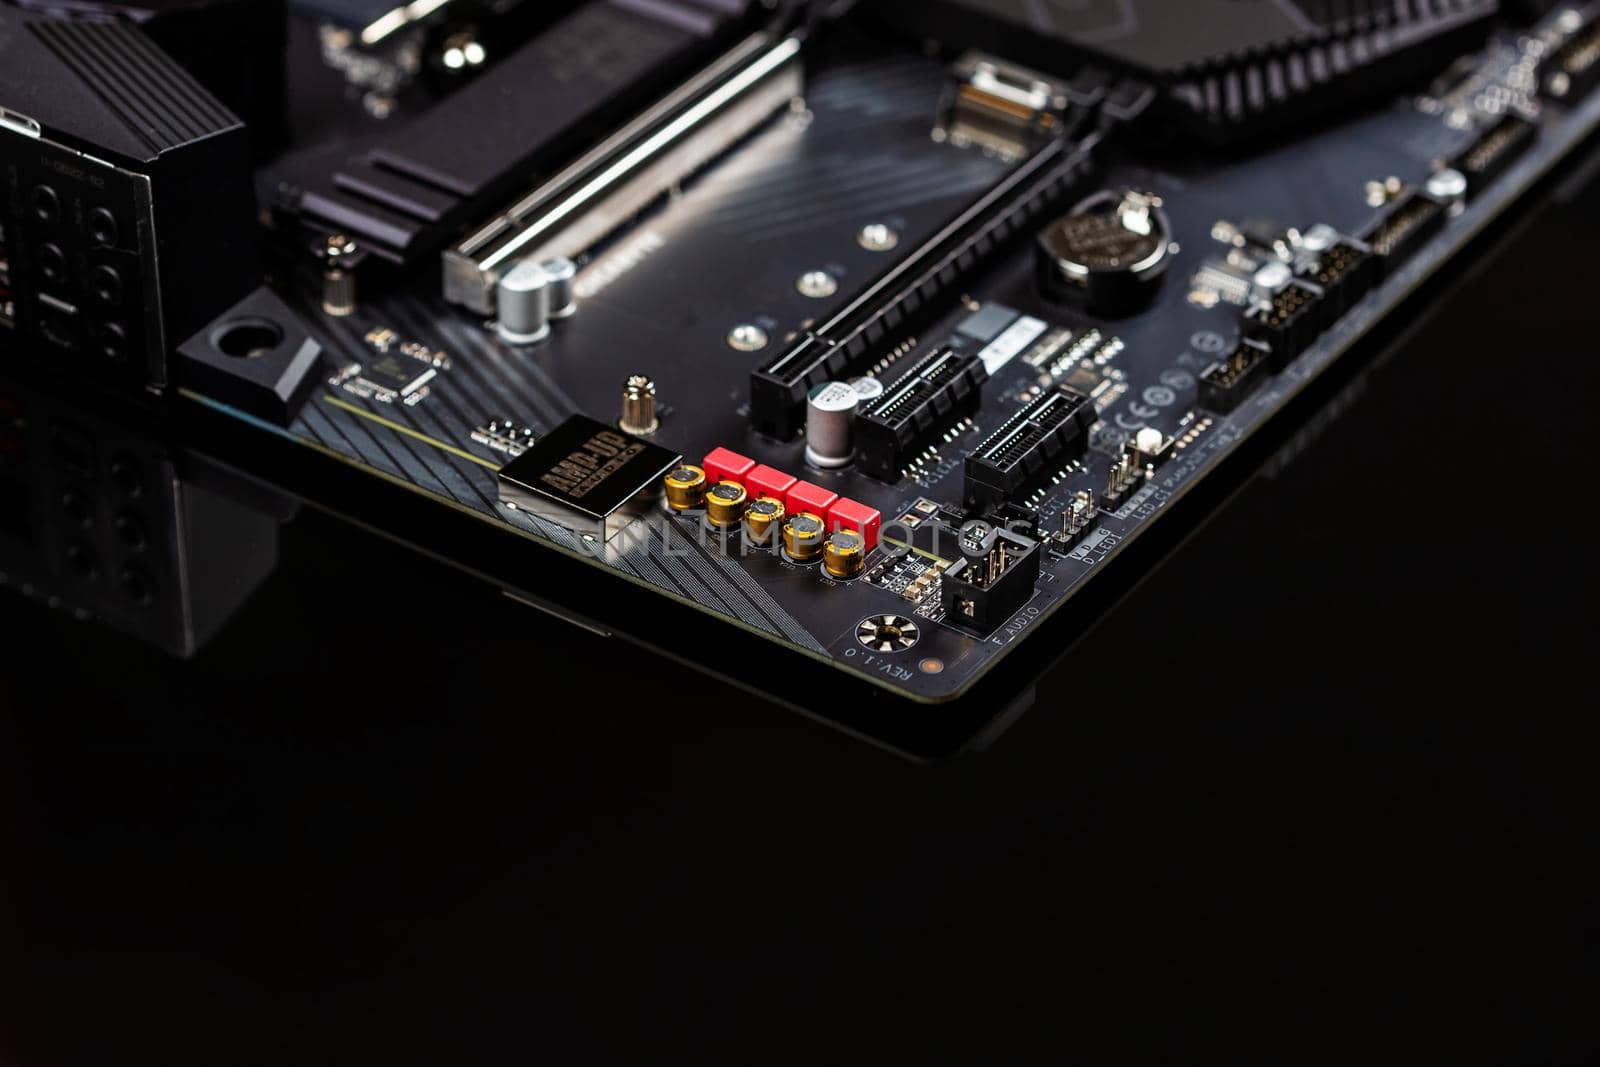 The motherboard on a table close-up, inside of a desktop computer showing chips, circuit boards and components with copy space.